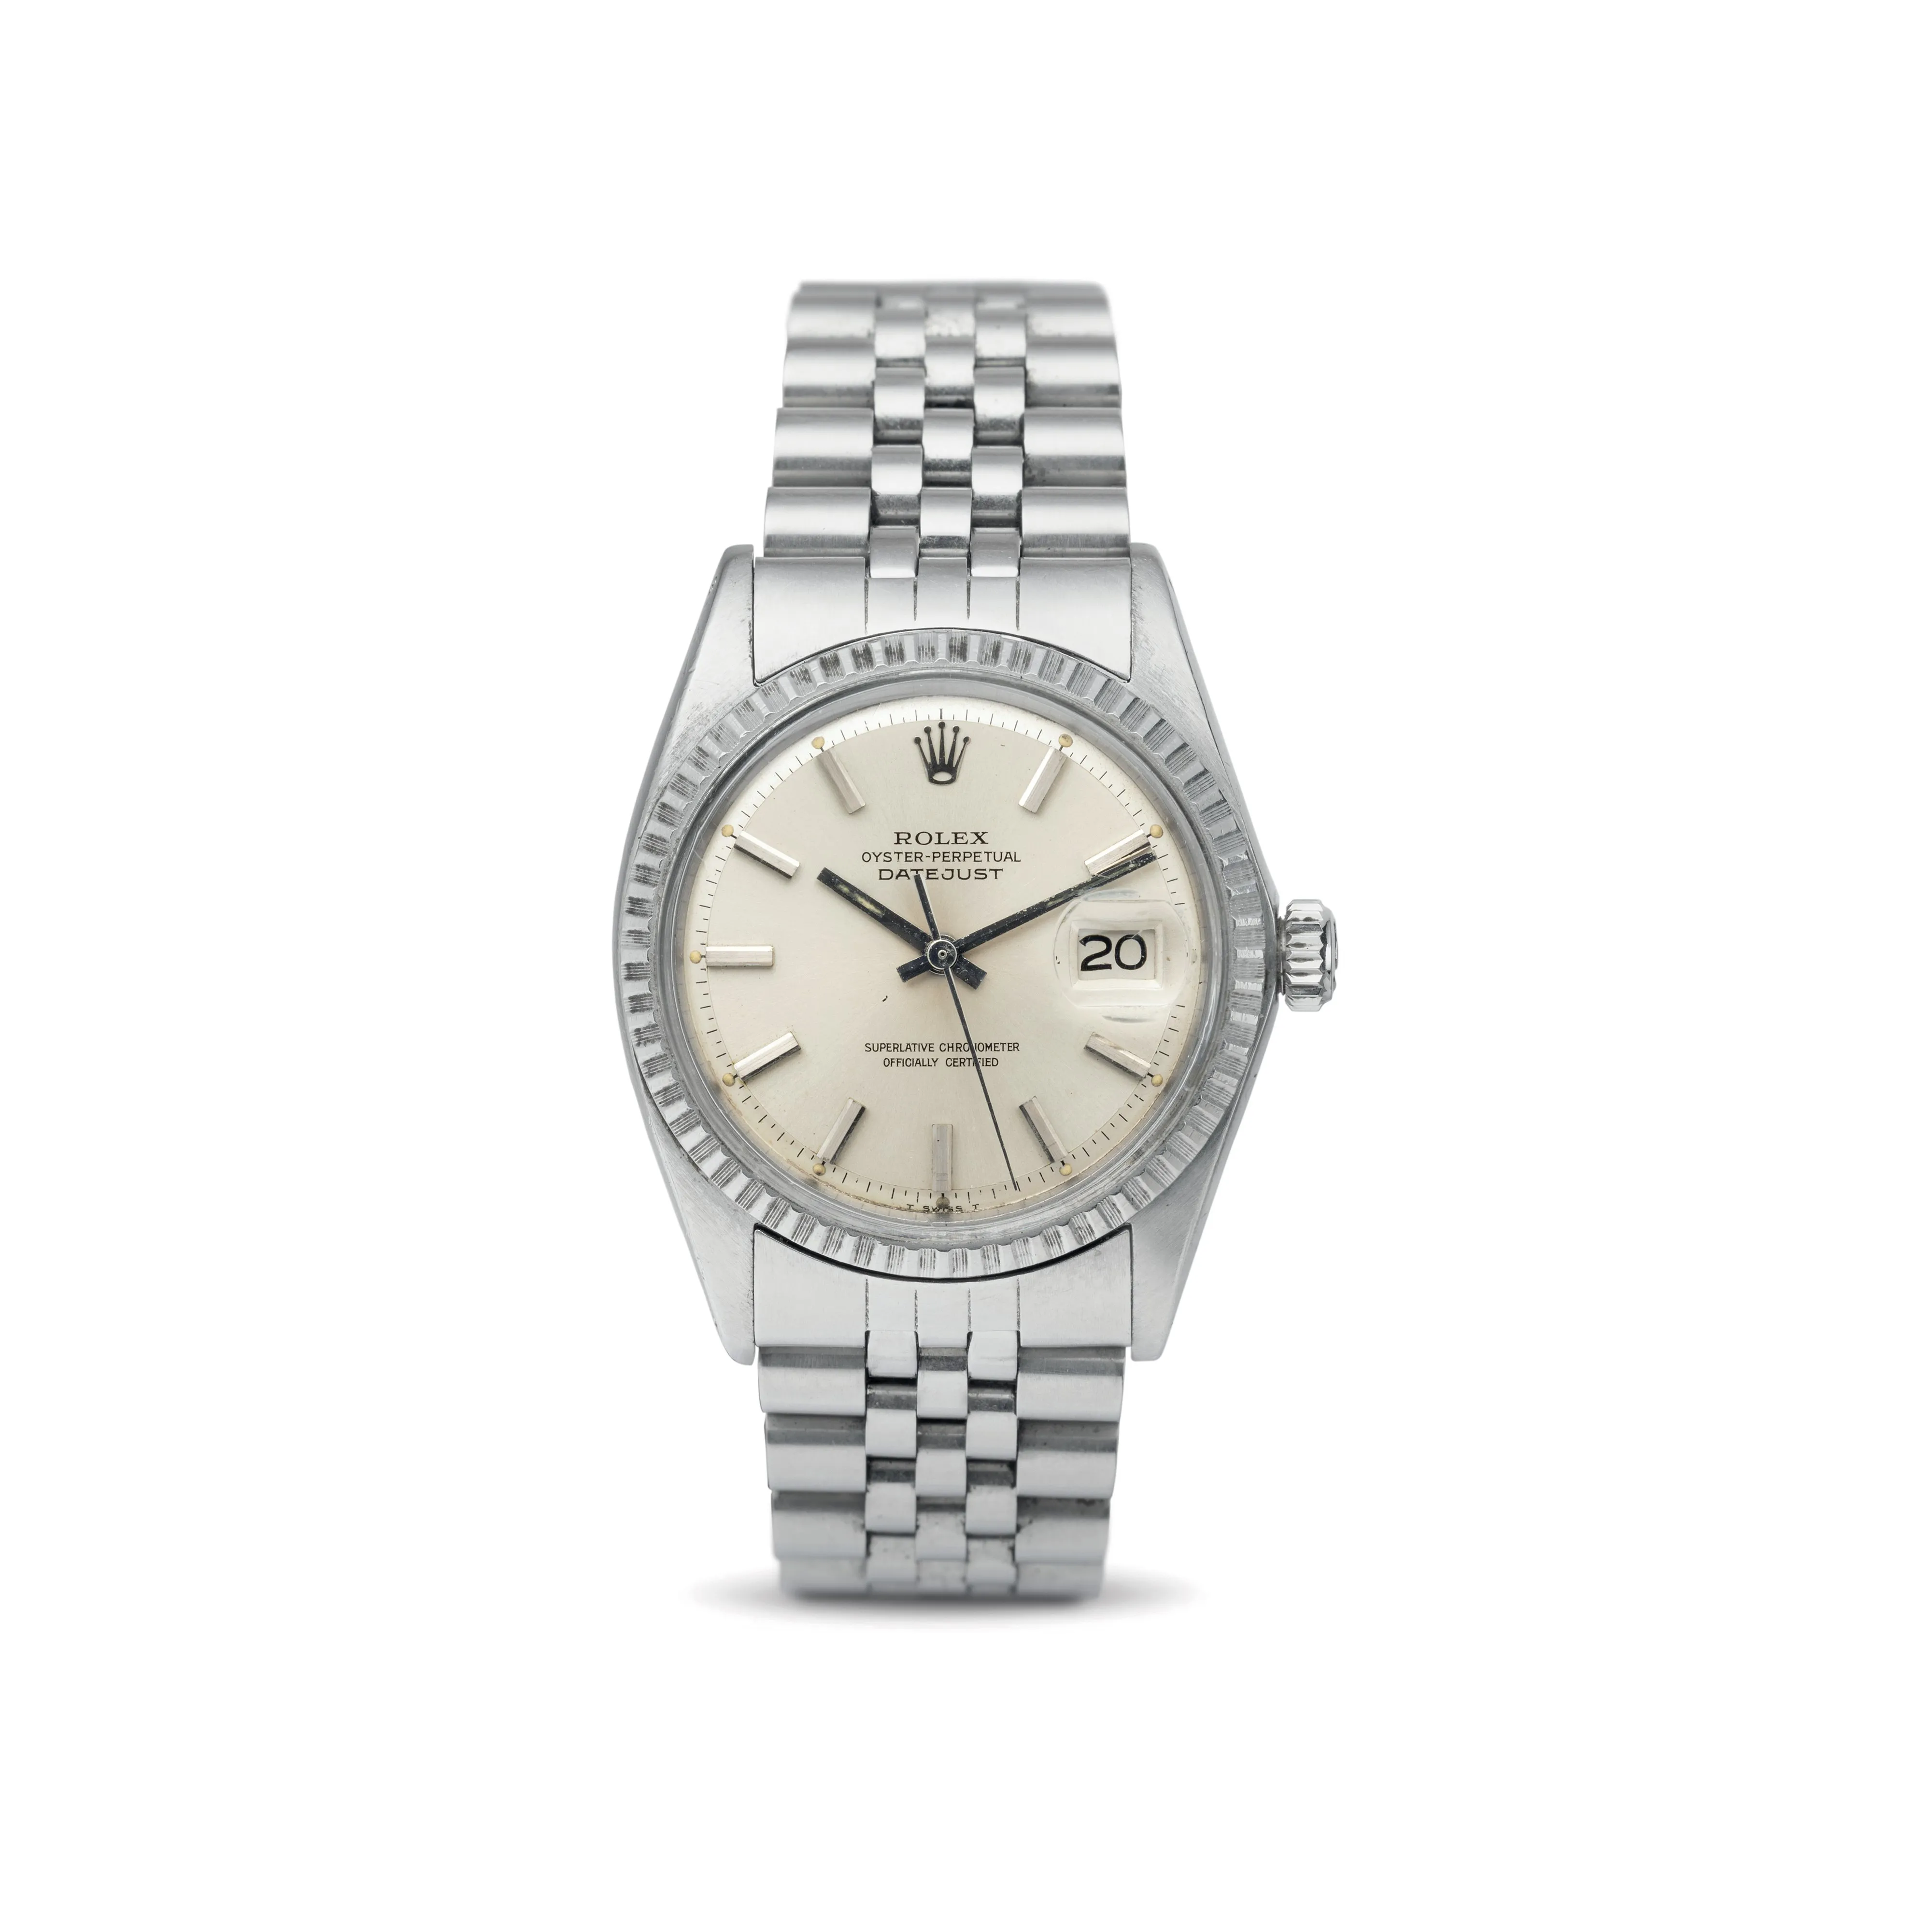 Rolex Datejust 1603 36mm Stainless steel Silver